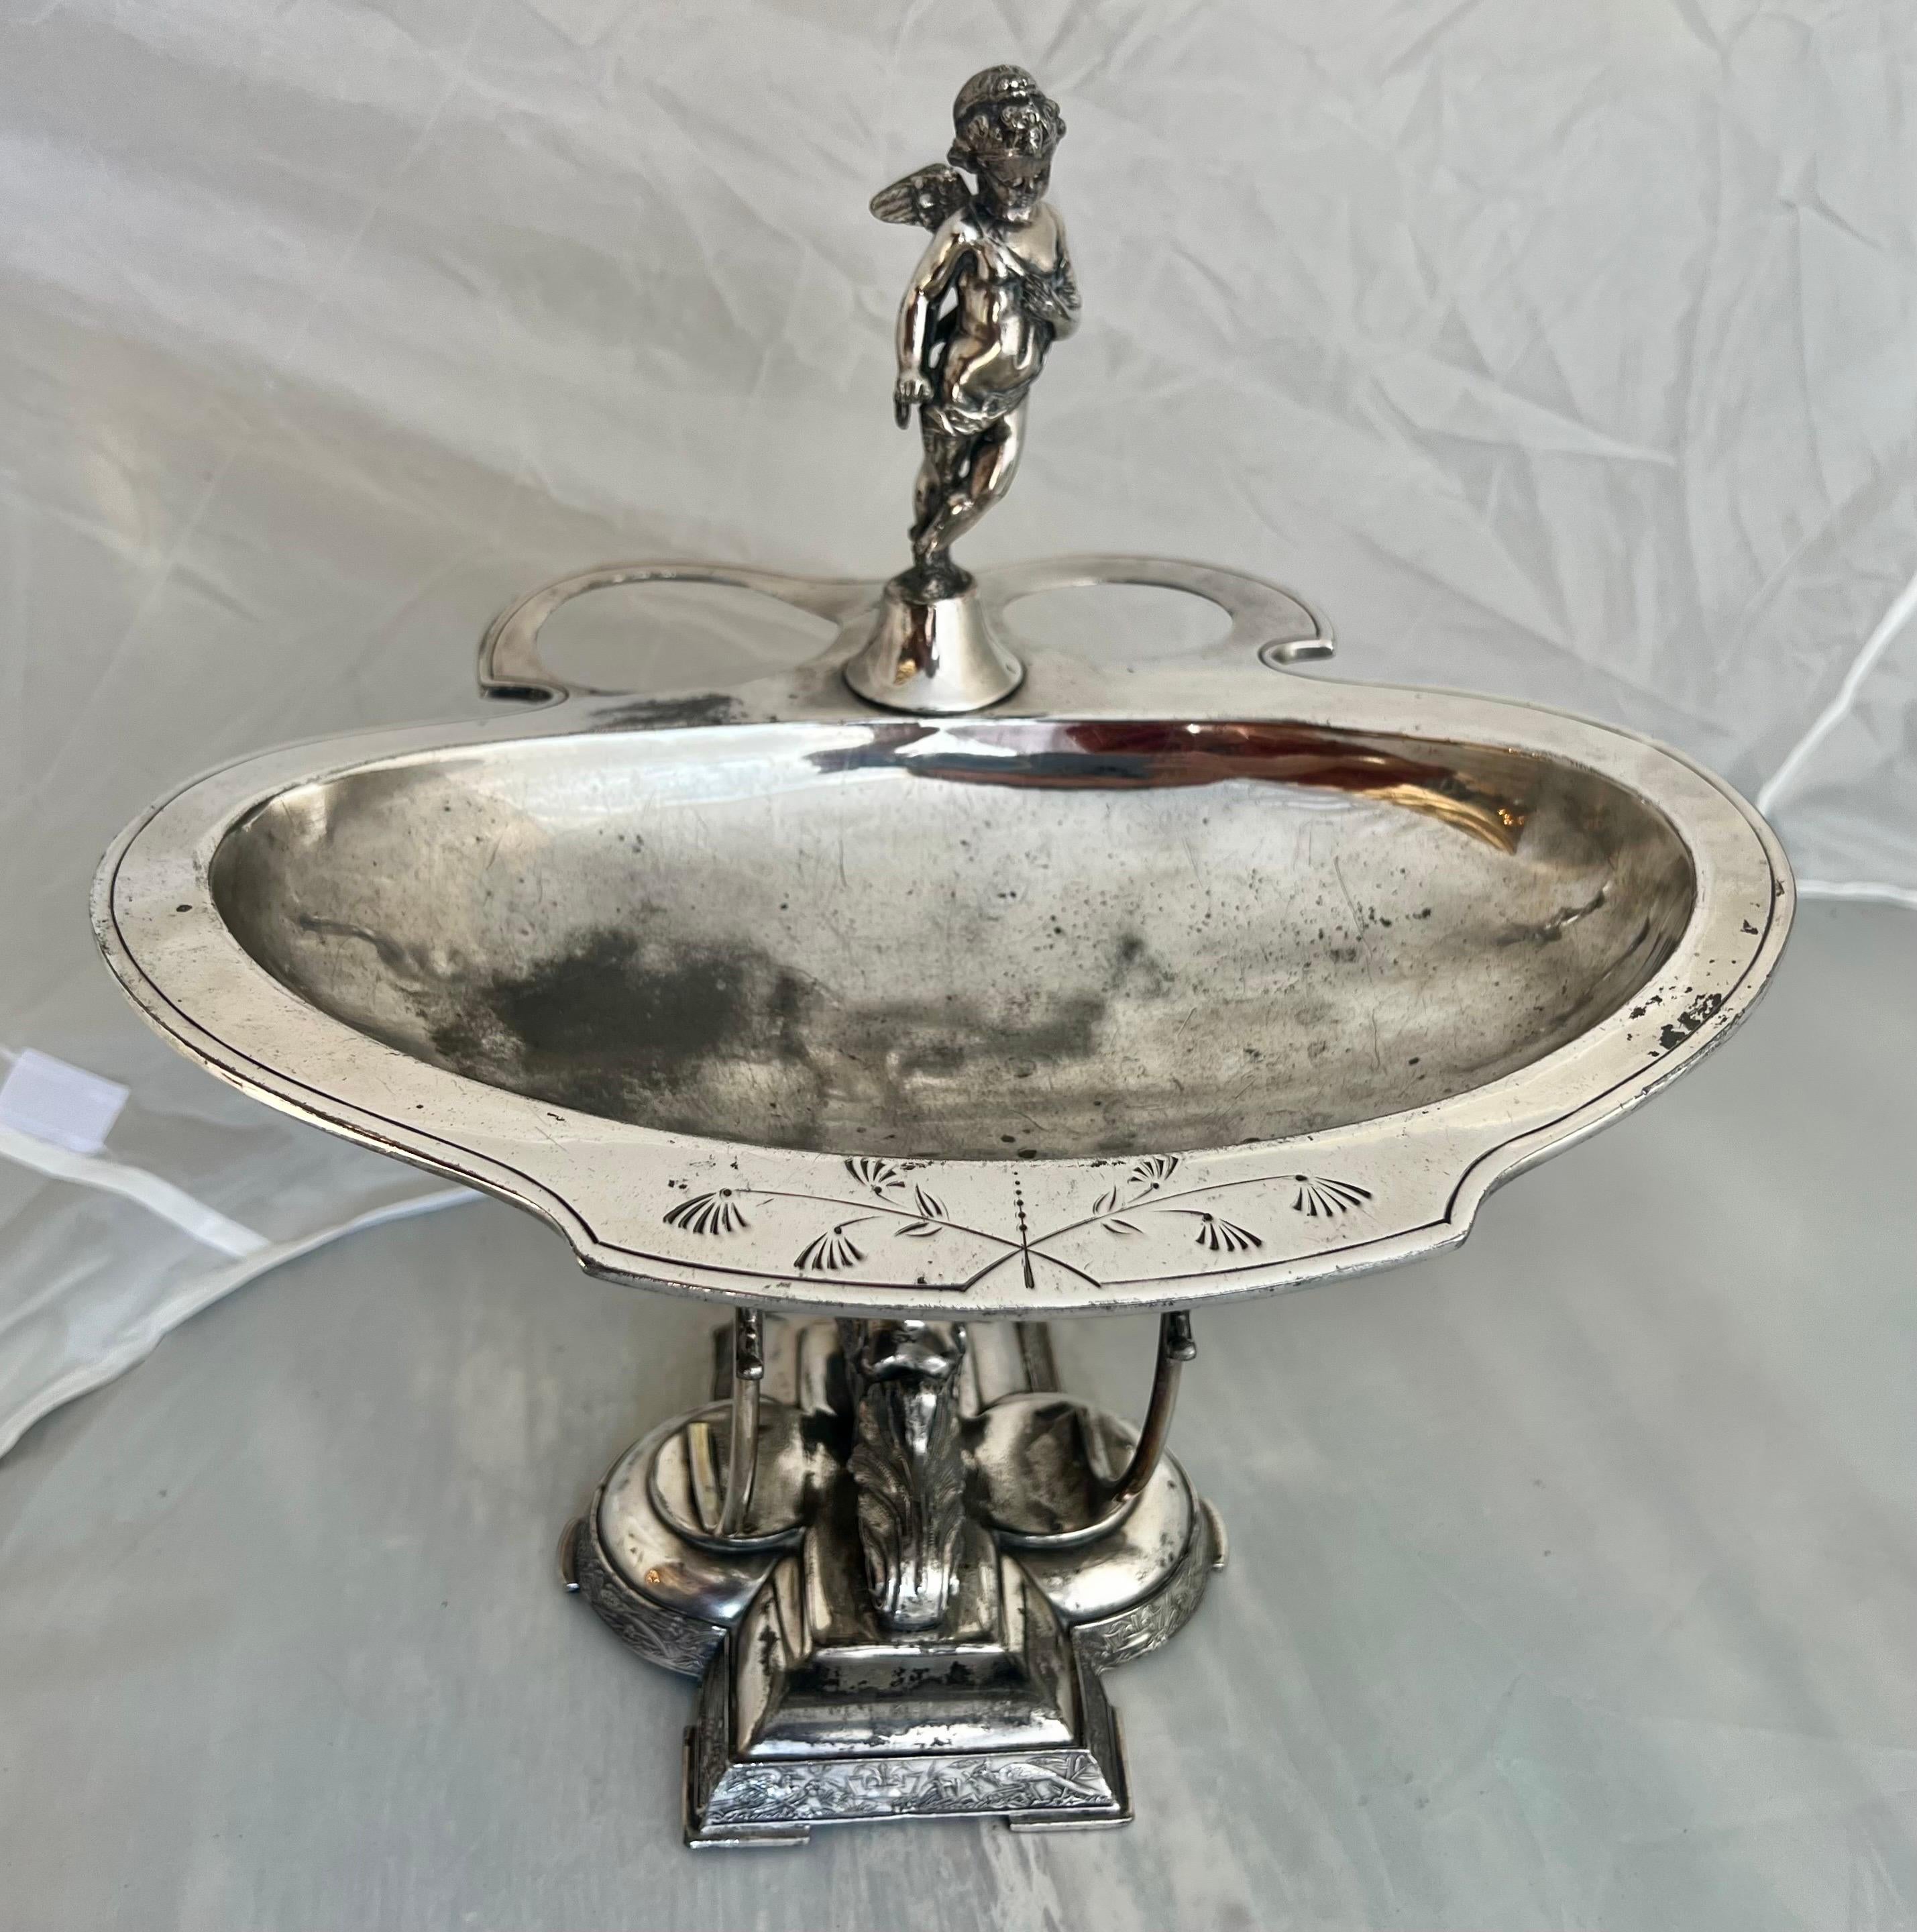 The Wilcox Silver Plate serving dish features a finely detailed angel and winged figure adornments along with acanthus leaf motifs.  The etched pheasants and foliage around the base add a touch of natural elegance. 
This piece likely reflects both